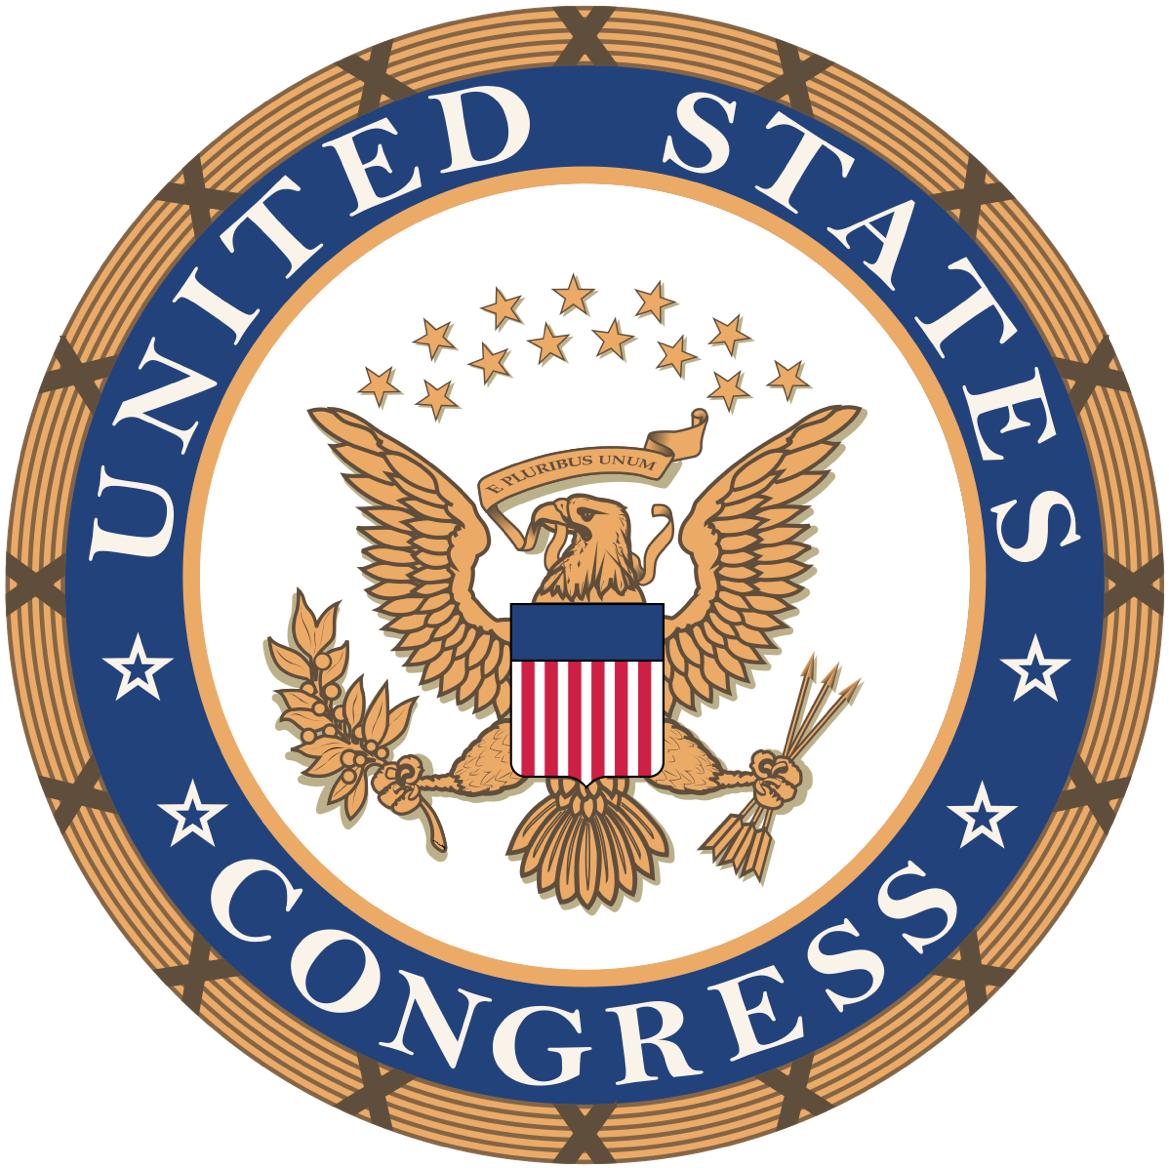 US Congress's images